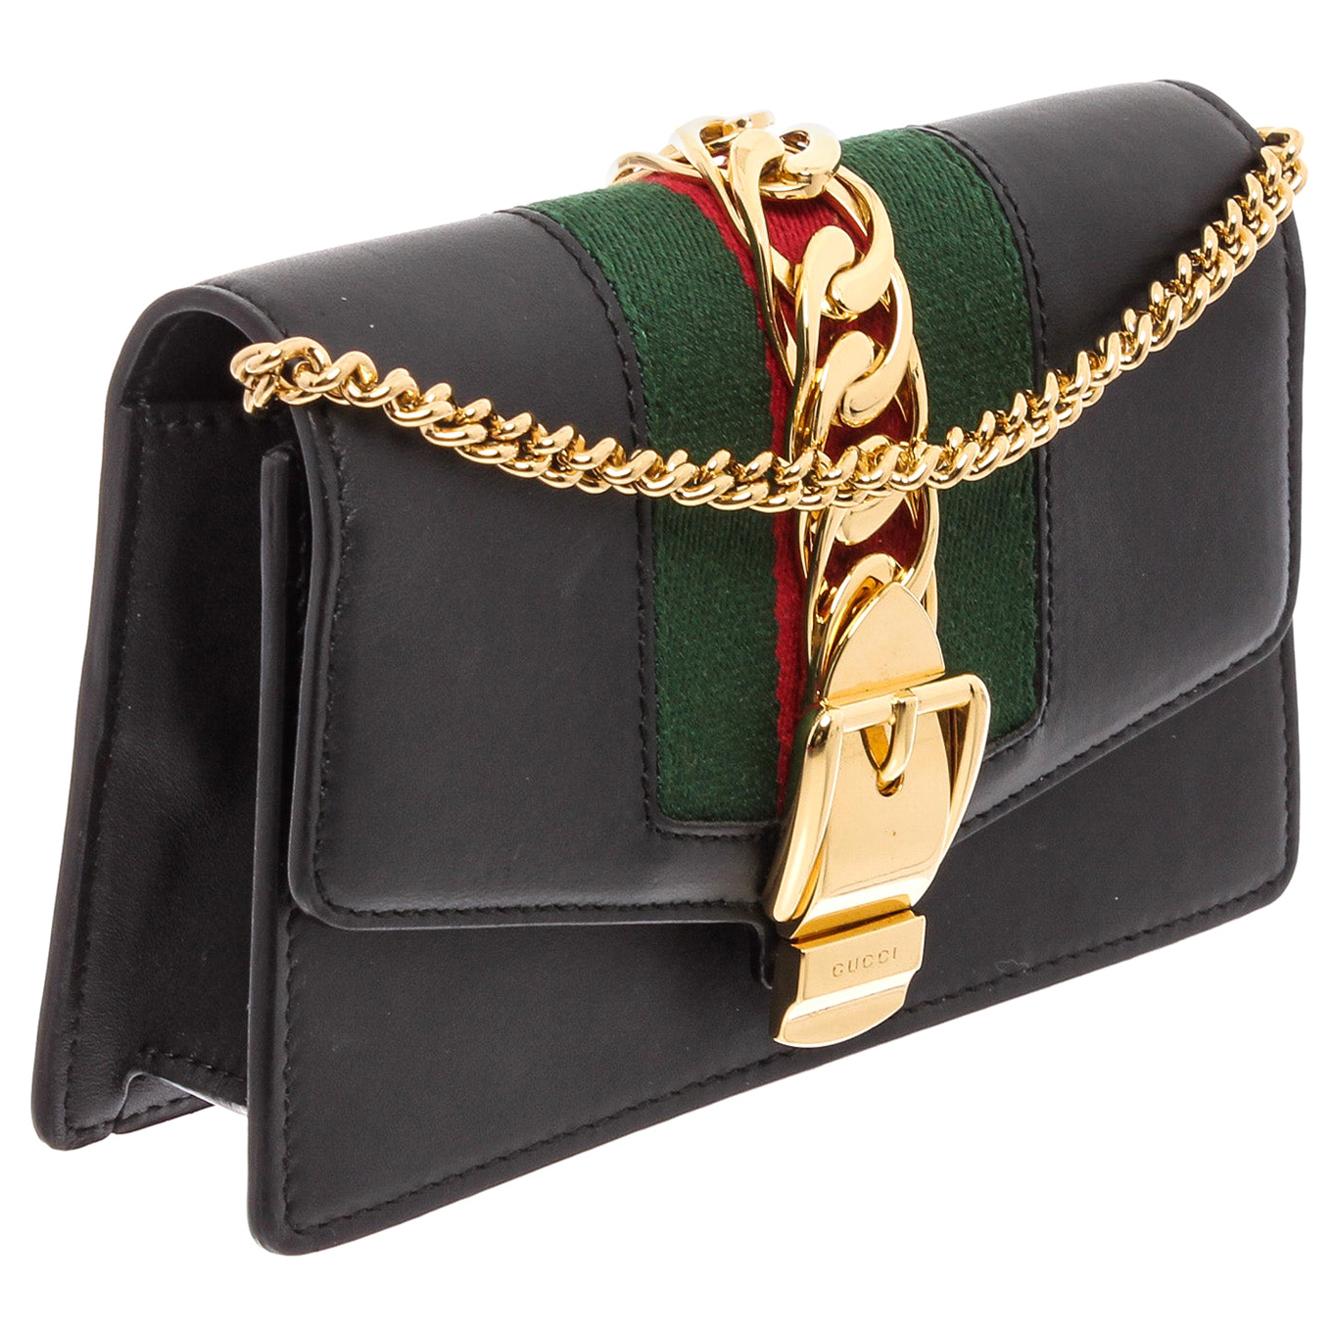 gucci black bag with chain